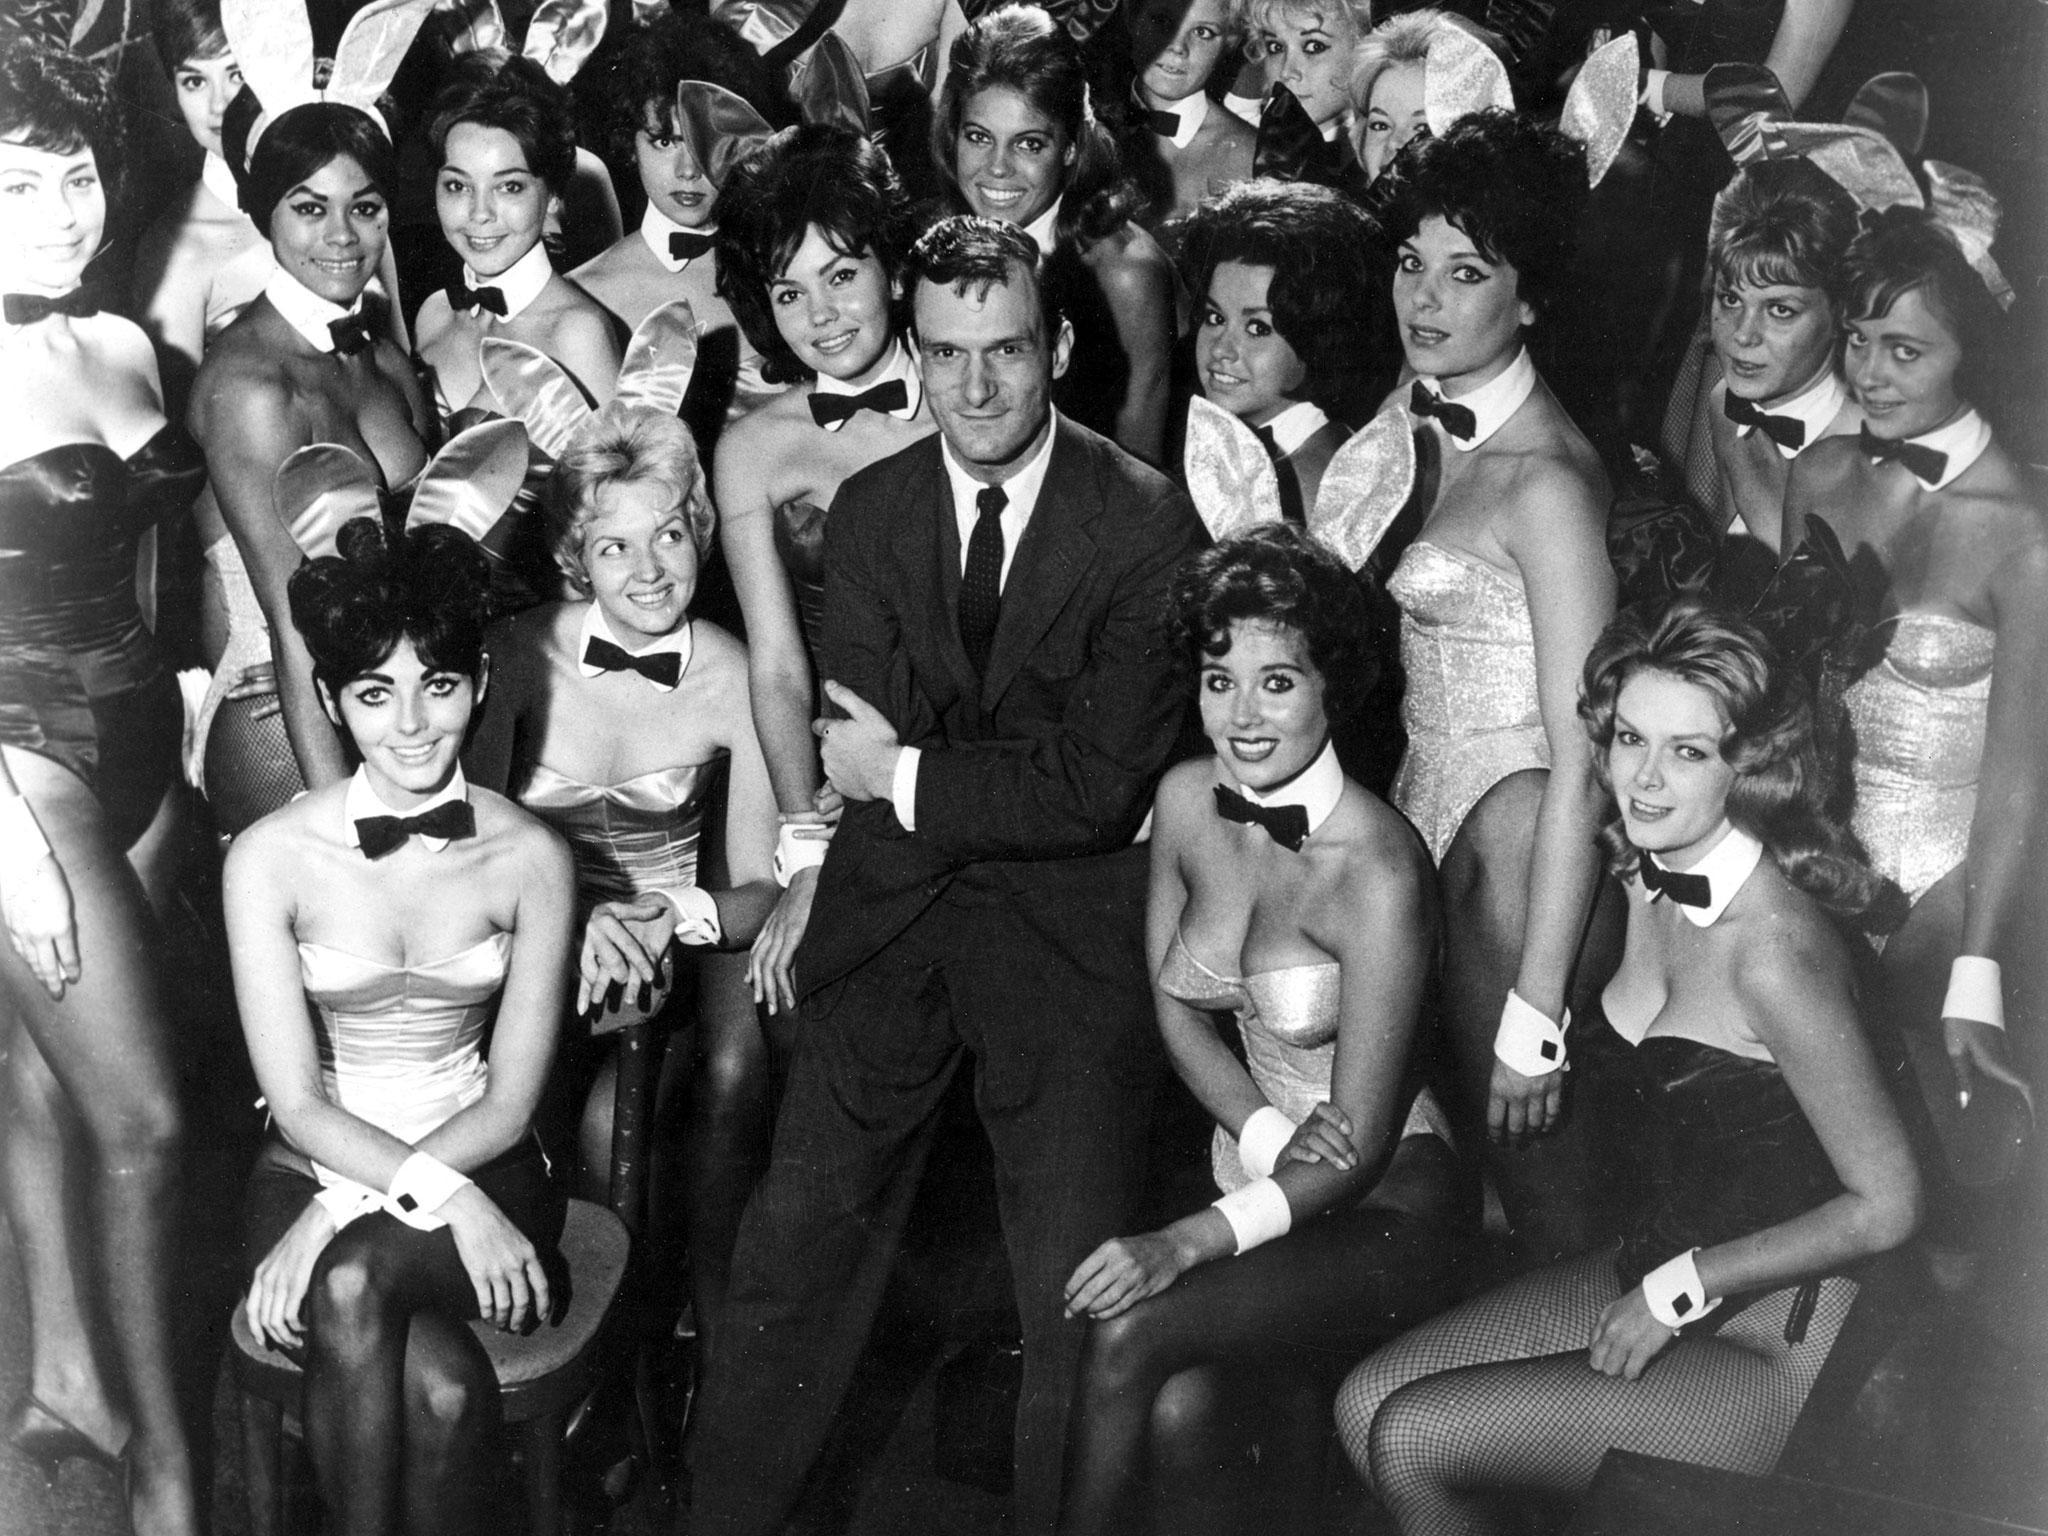 Hugh Hefner poses with Playboy Bunnies at one of America's chain of Playboy clubs in 1962, a year before Ms Steinem went undercover